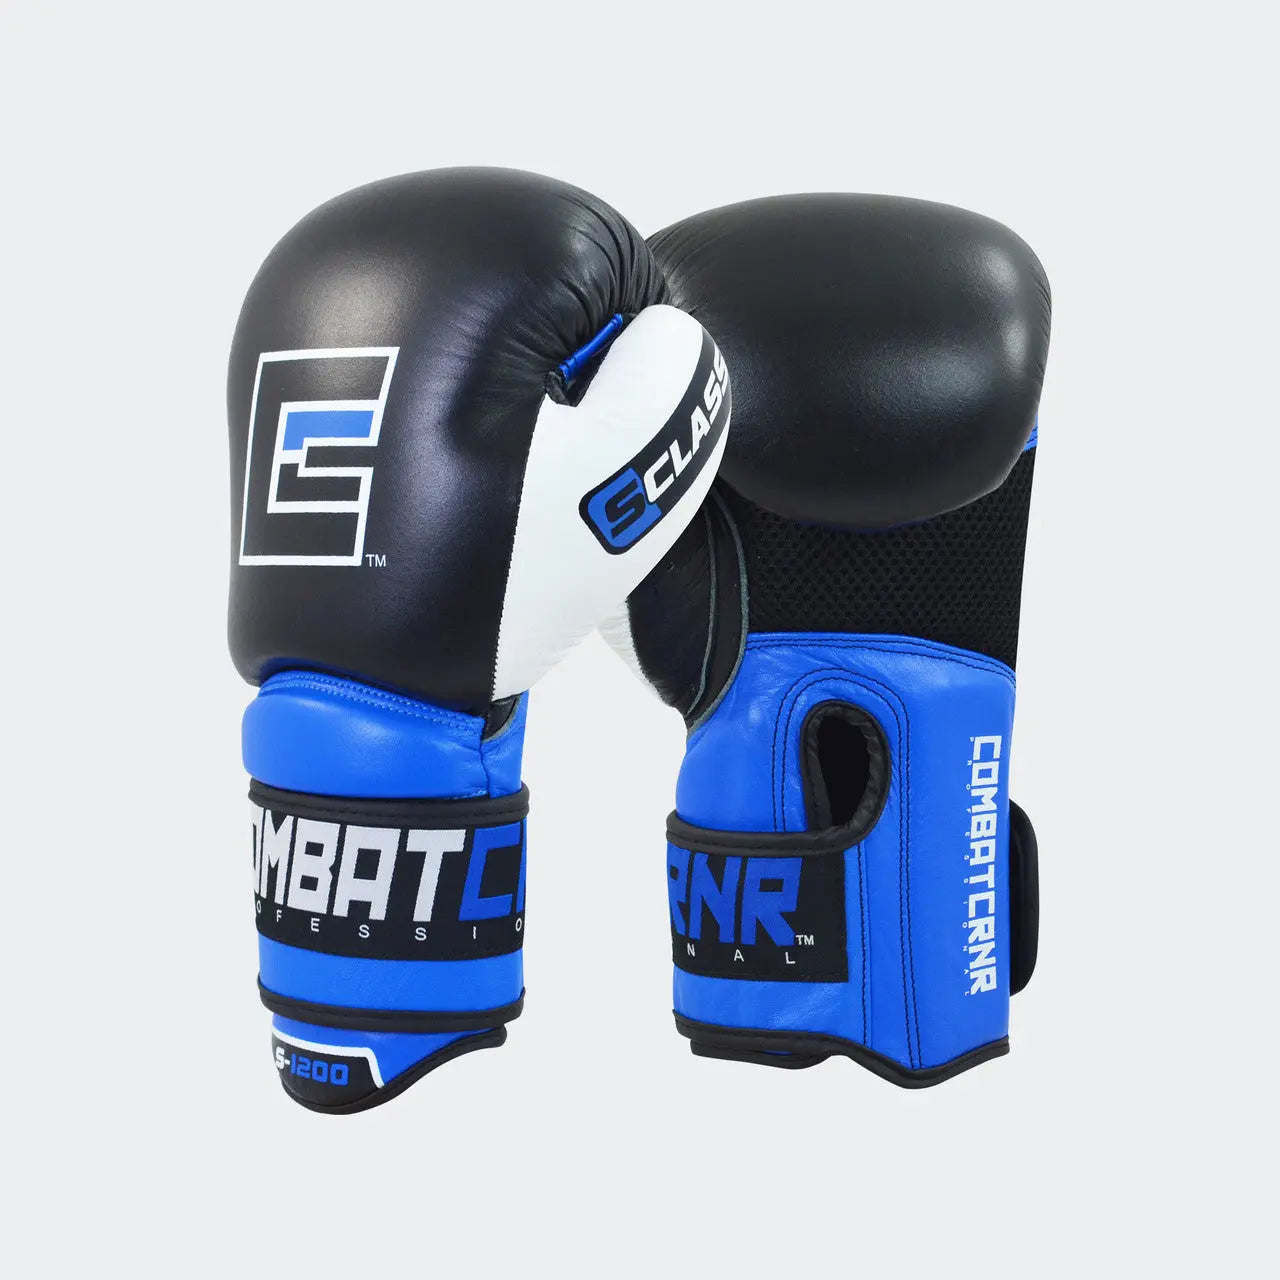 S-CLASS BOXING GLOVES - Prime Combats